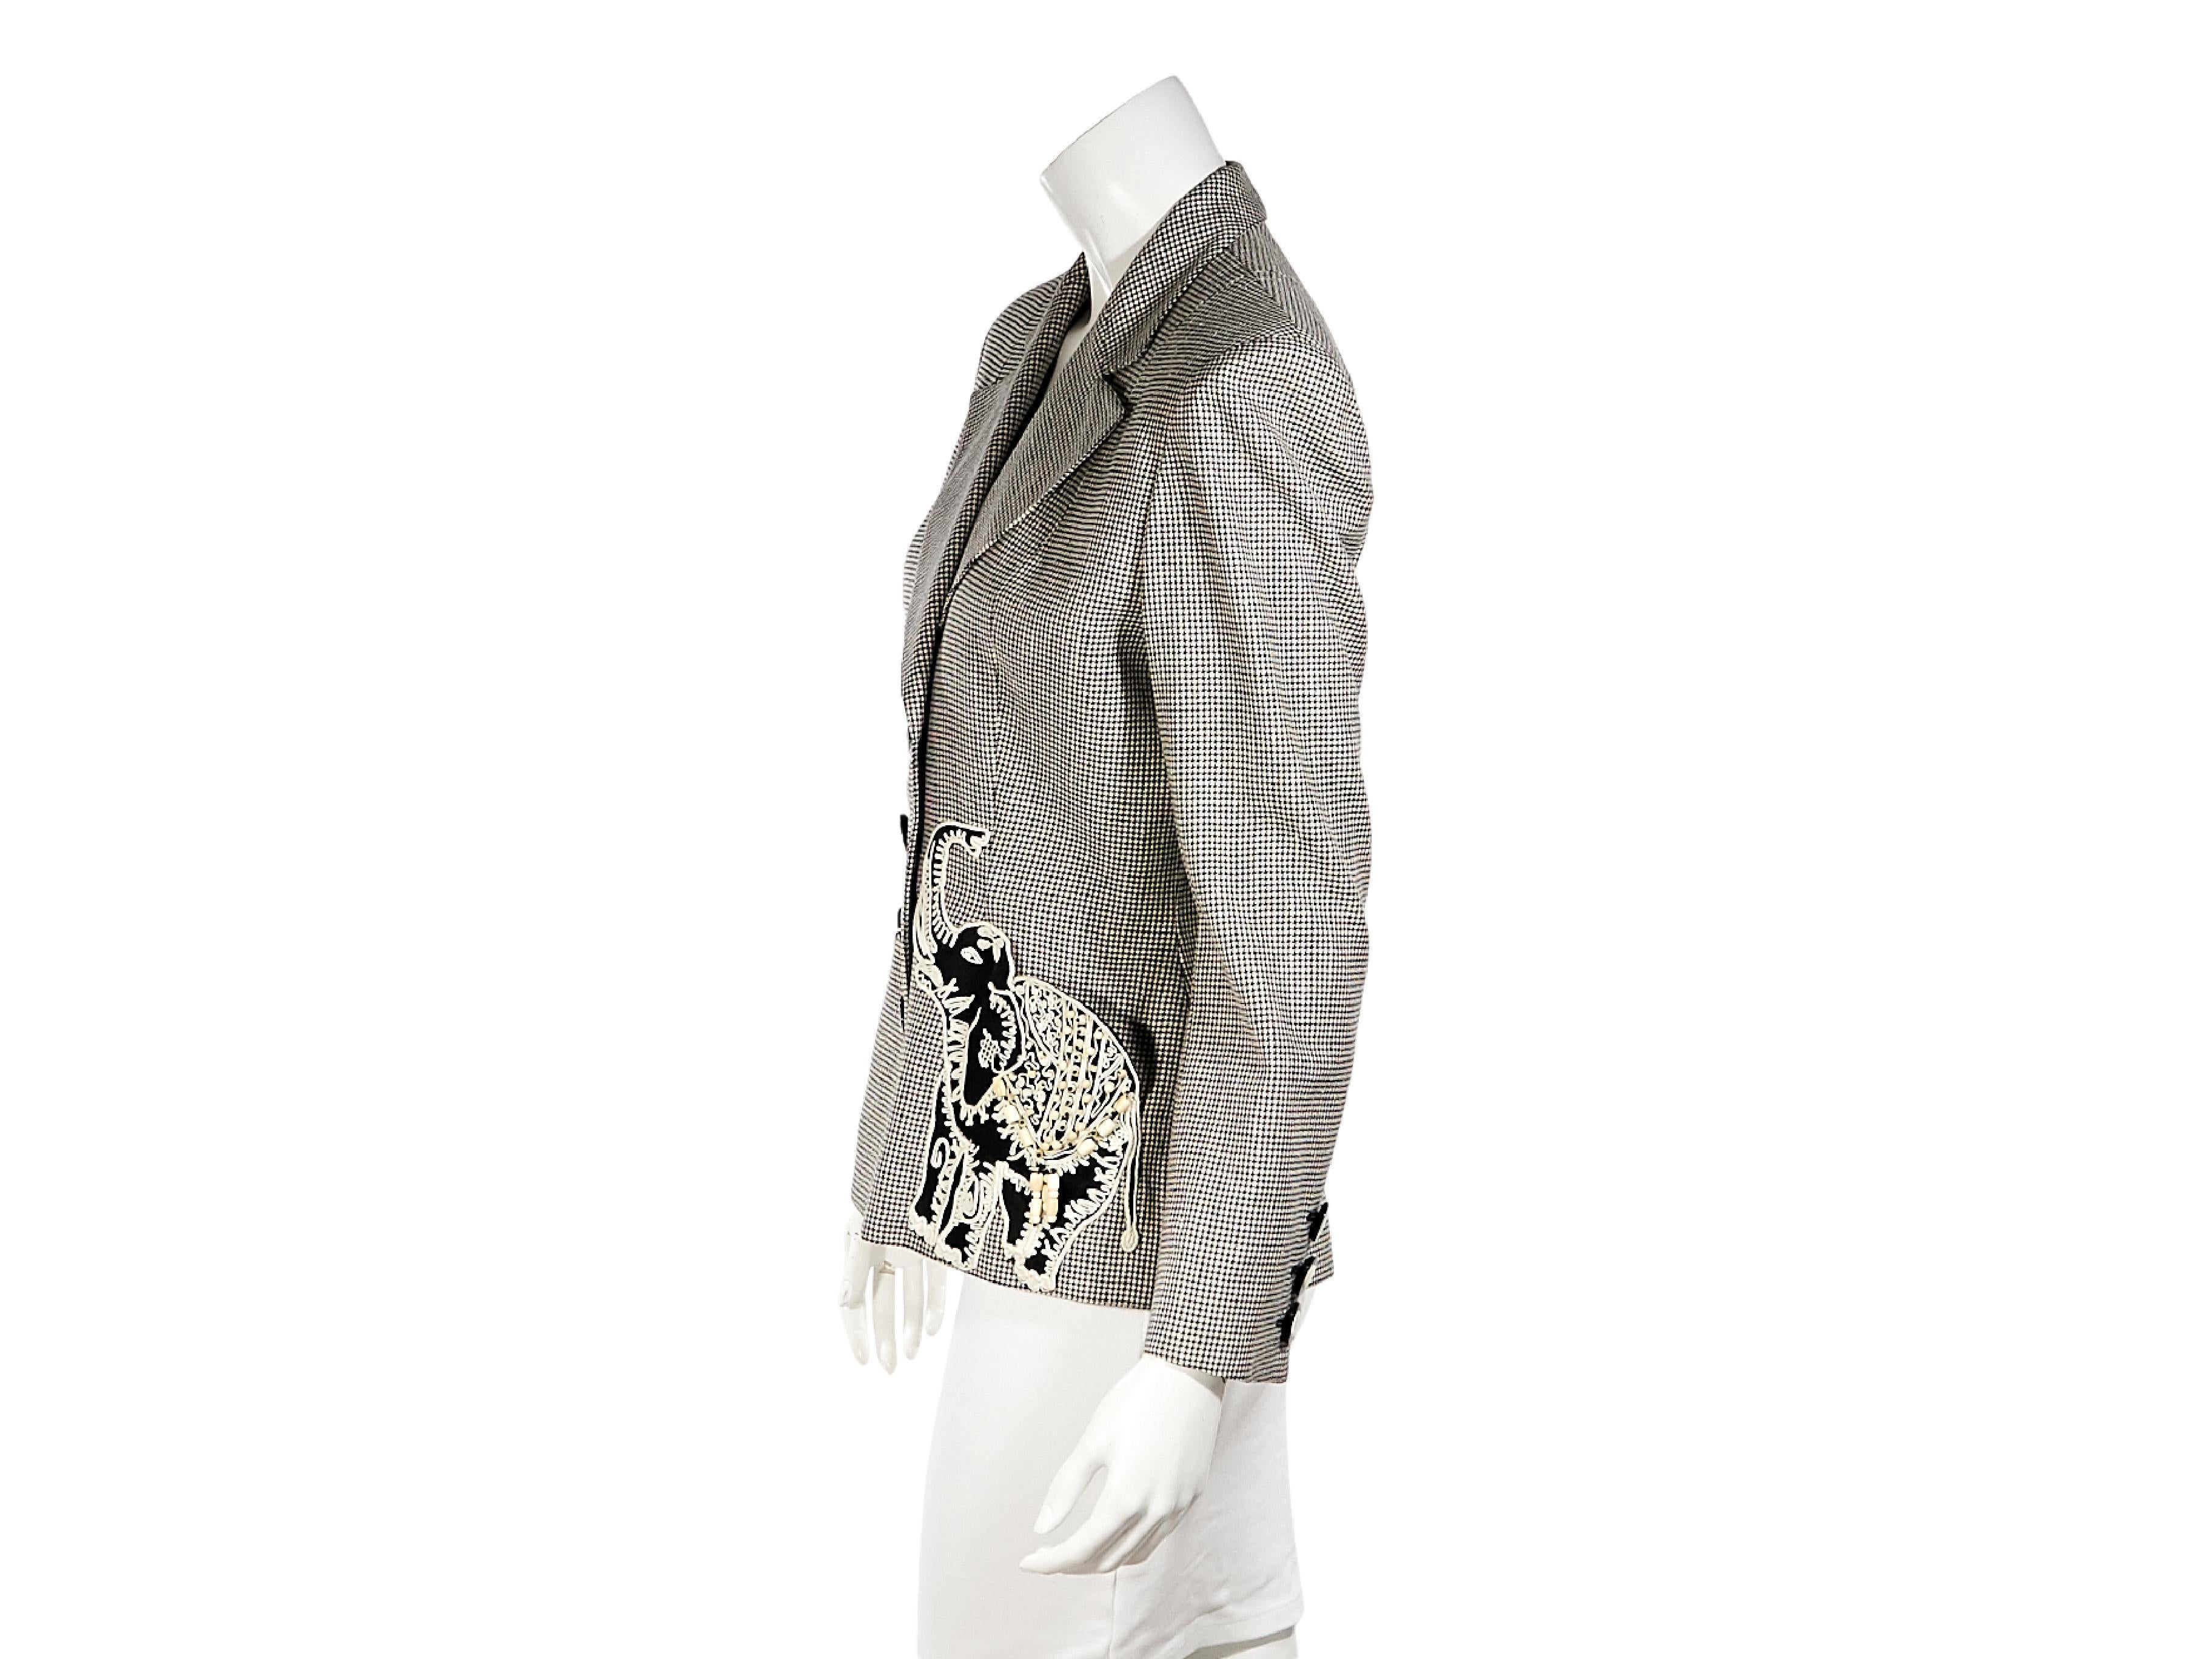 Product details:  Vintage black and white wool houndstooth blazer by Valentino.  Circa the 1980s.  Peak lapel.  Long sleeves.  Three-button detail at cuffs.  Button-front closure.  Waist patch pockets with elephant applique design.  36